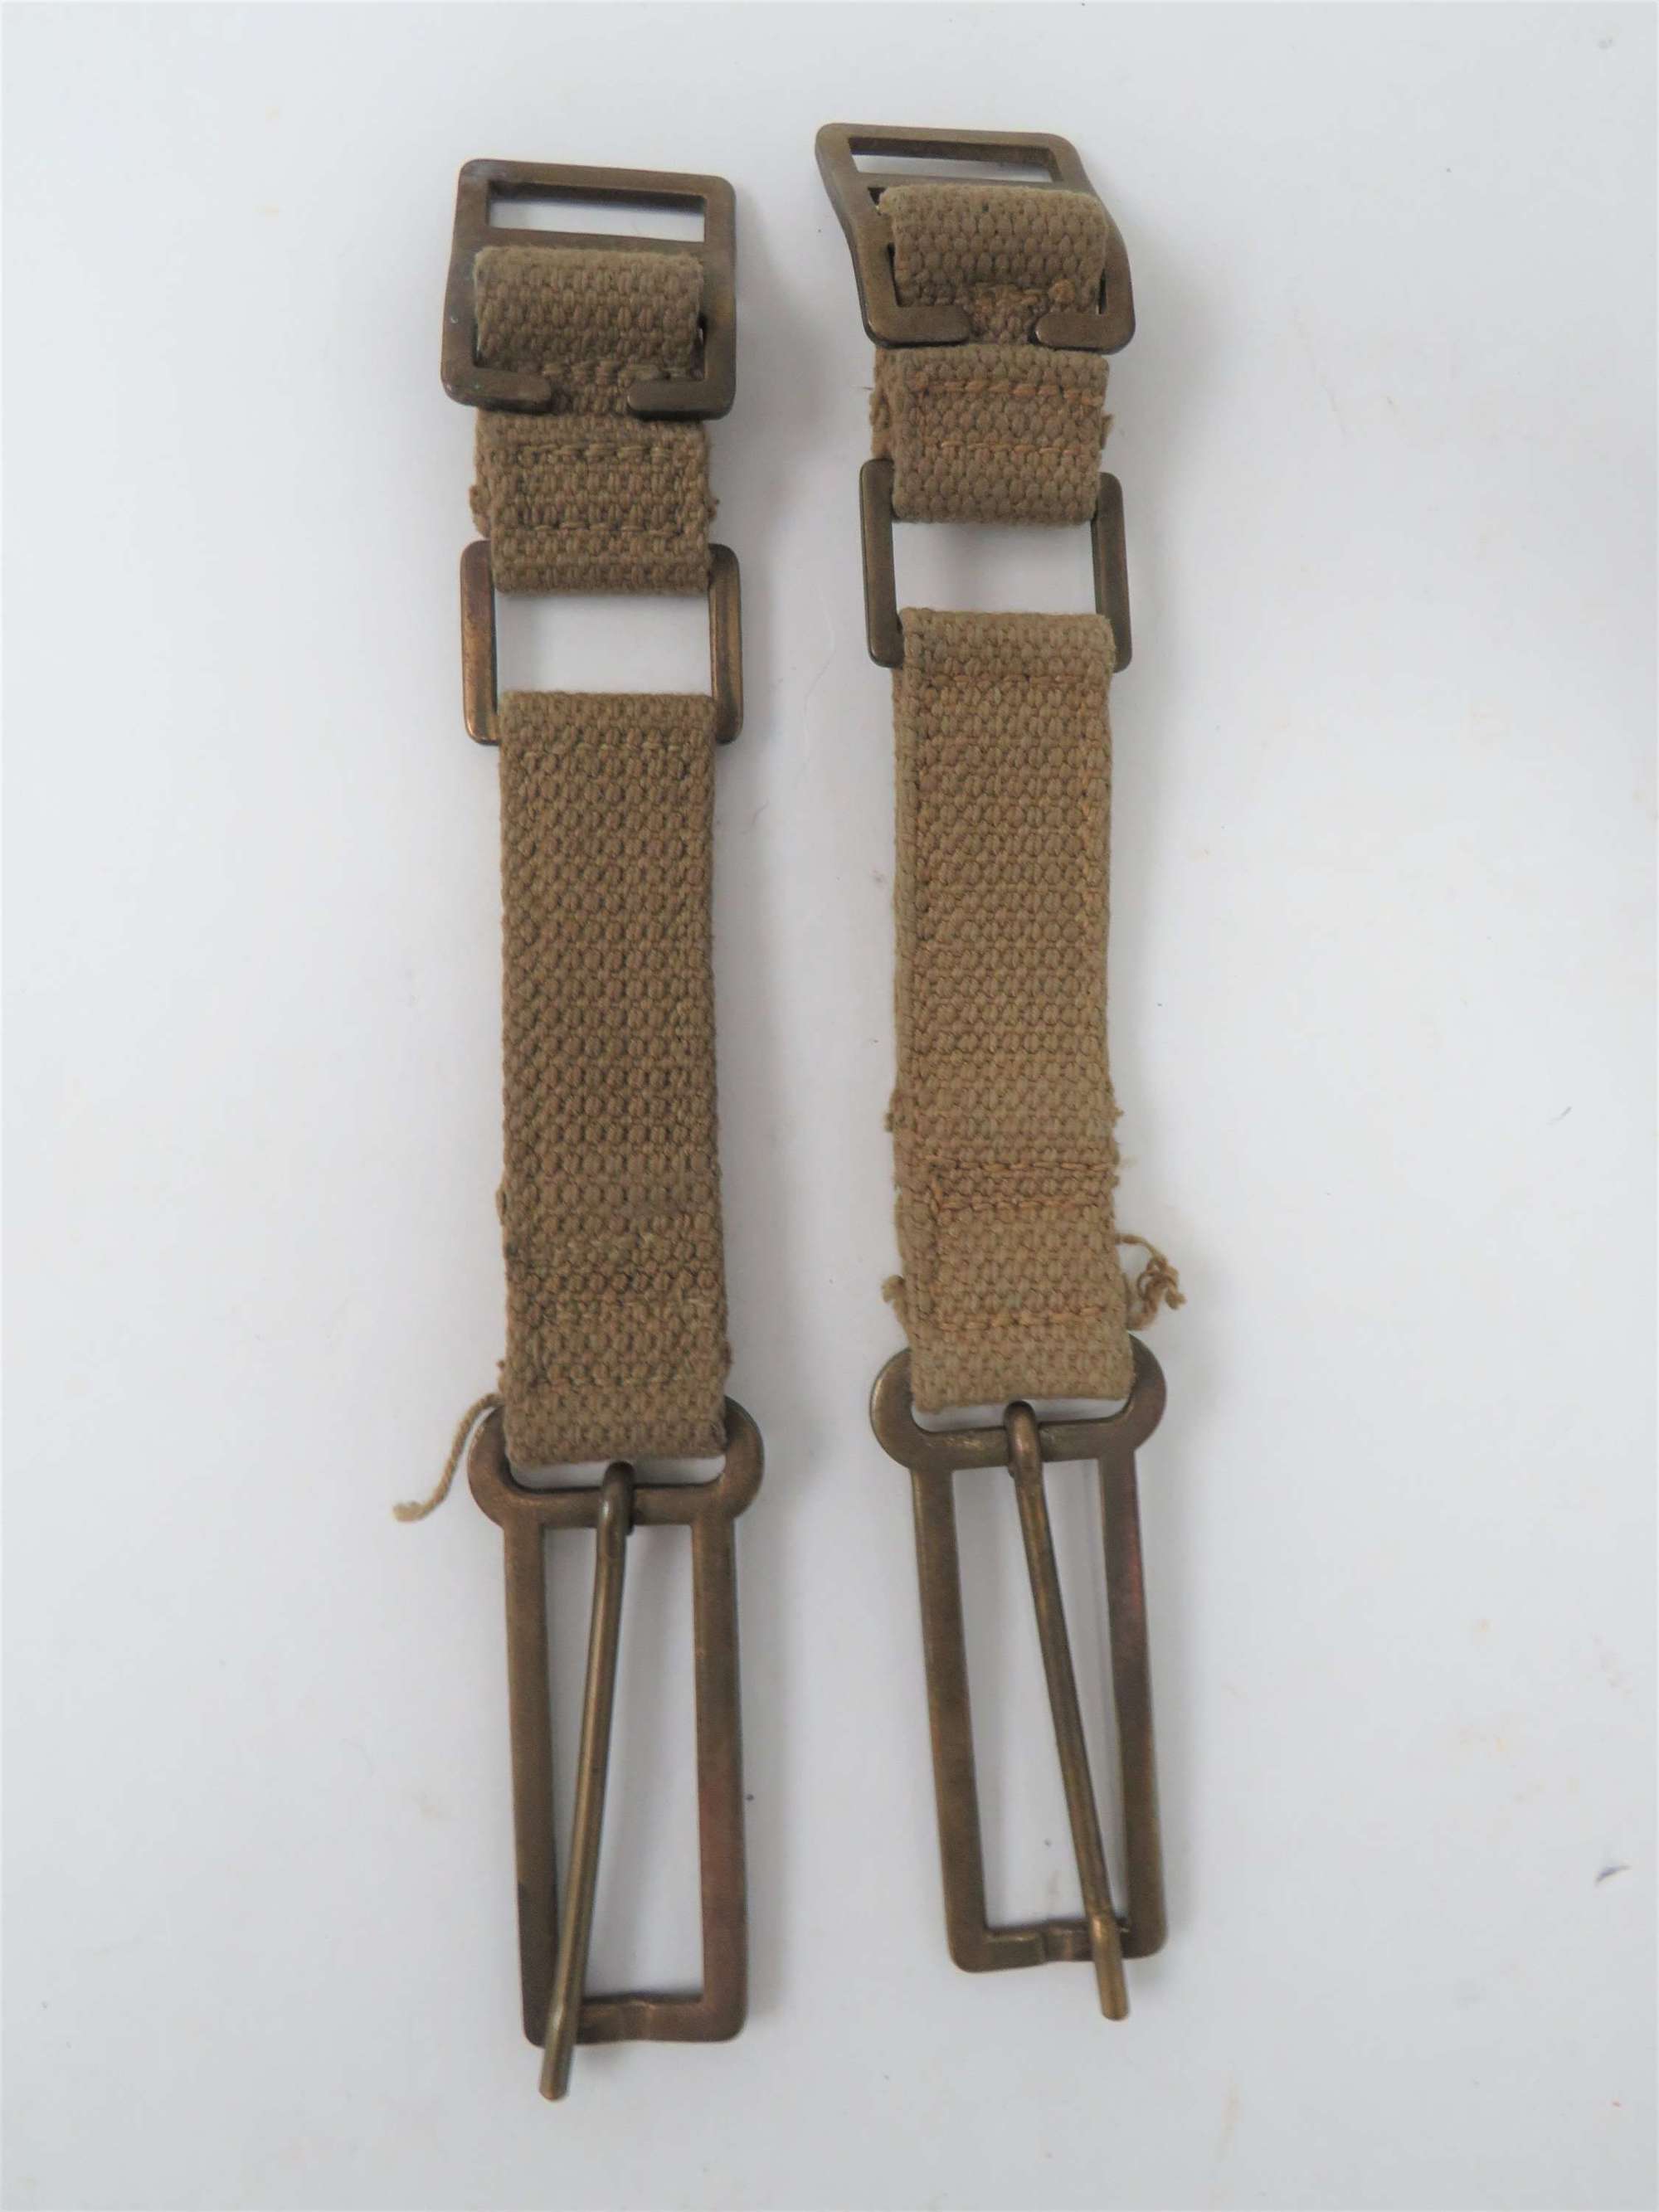 Pair of 1937 Pattern Brace Attachments